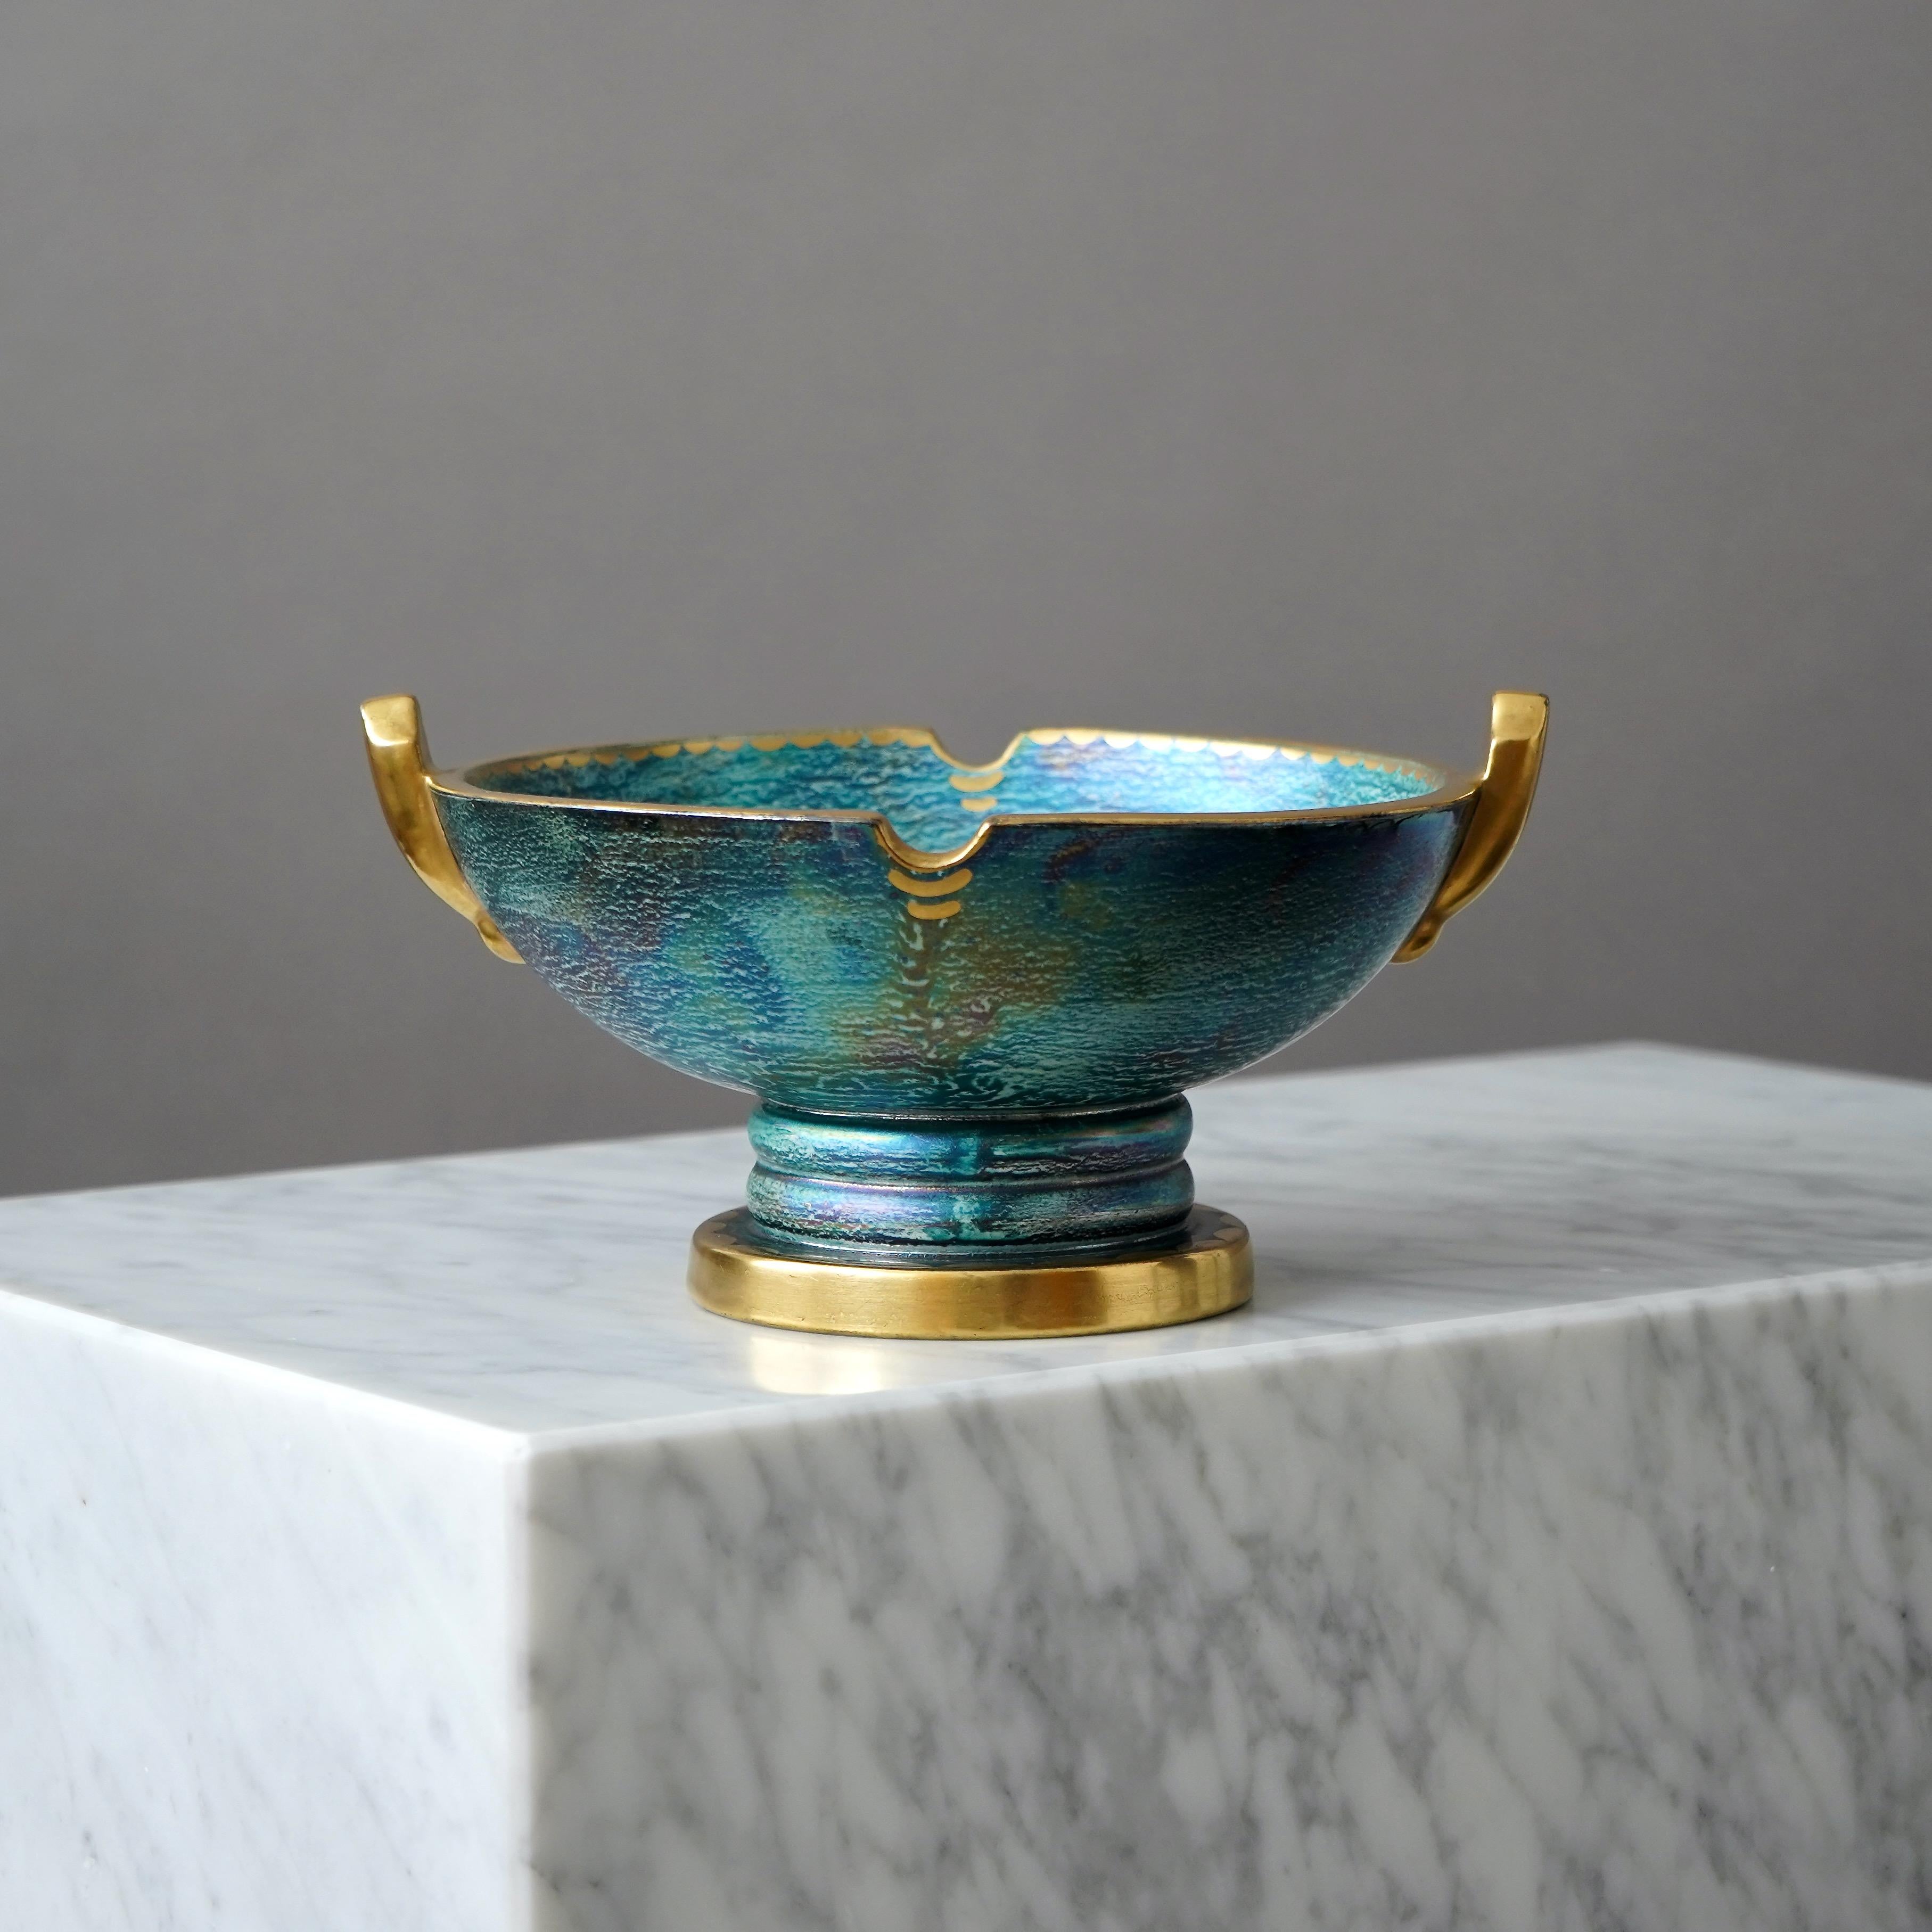 A beautiful footed bowl with amazing lustre glaze and hand painted gold details. Scandinavian Grace / Art Deco.
Made by Josef Ekberg at Gustavsberg, Sweden, 1920s.

Great condition. 
Signed 'J.E.' and stamped with makers mark.

JOSEF EKBERG